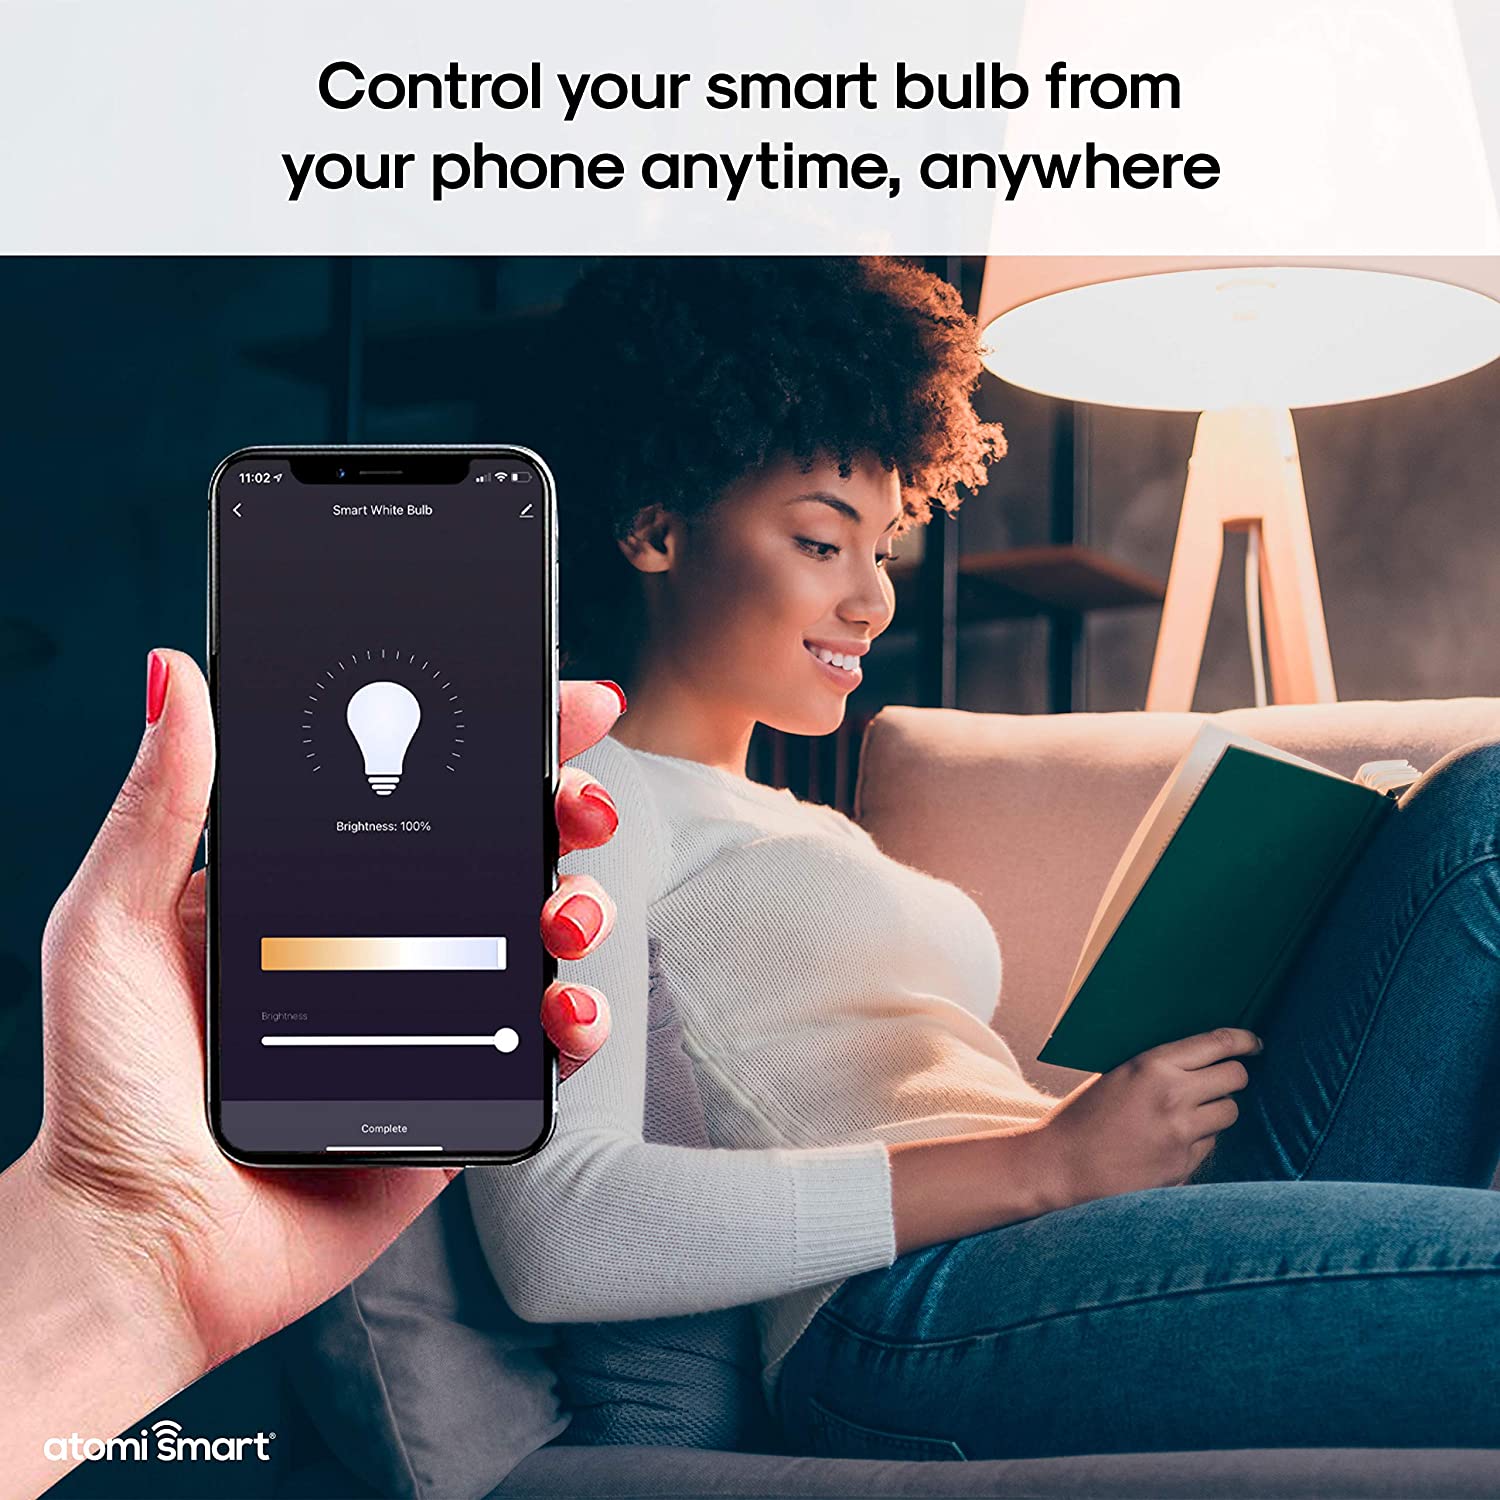 Atomi AT-1291 Smart WiFi LED Bulb with Dimmable and Tunable White Light 2700K-6000K, White